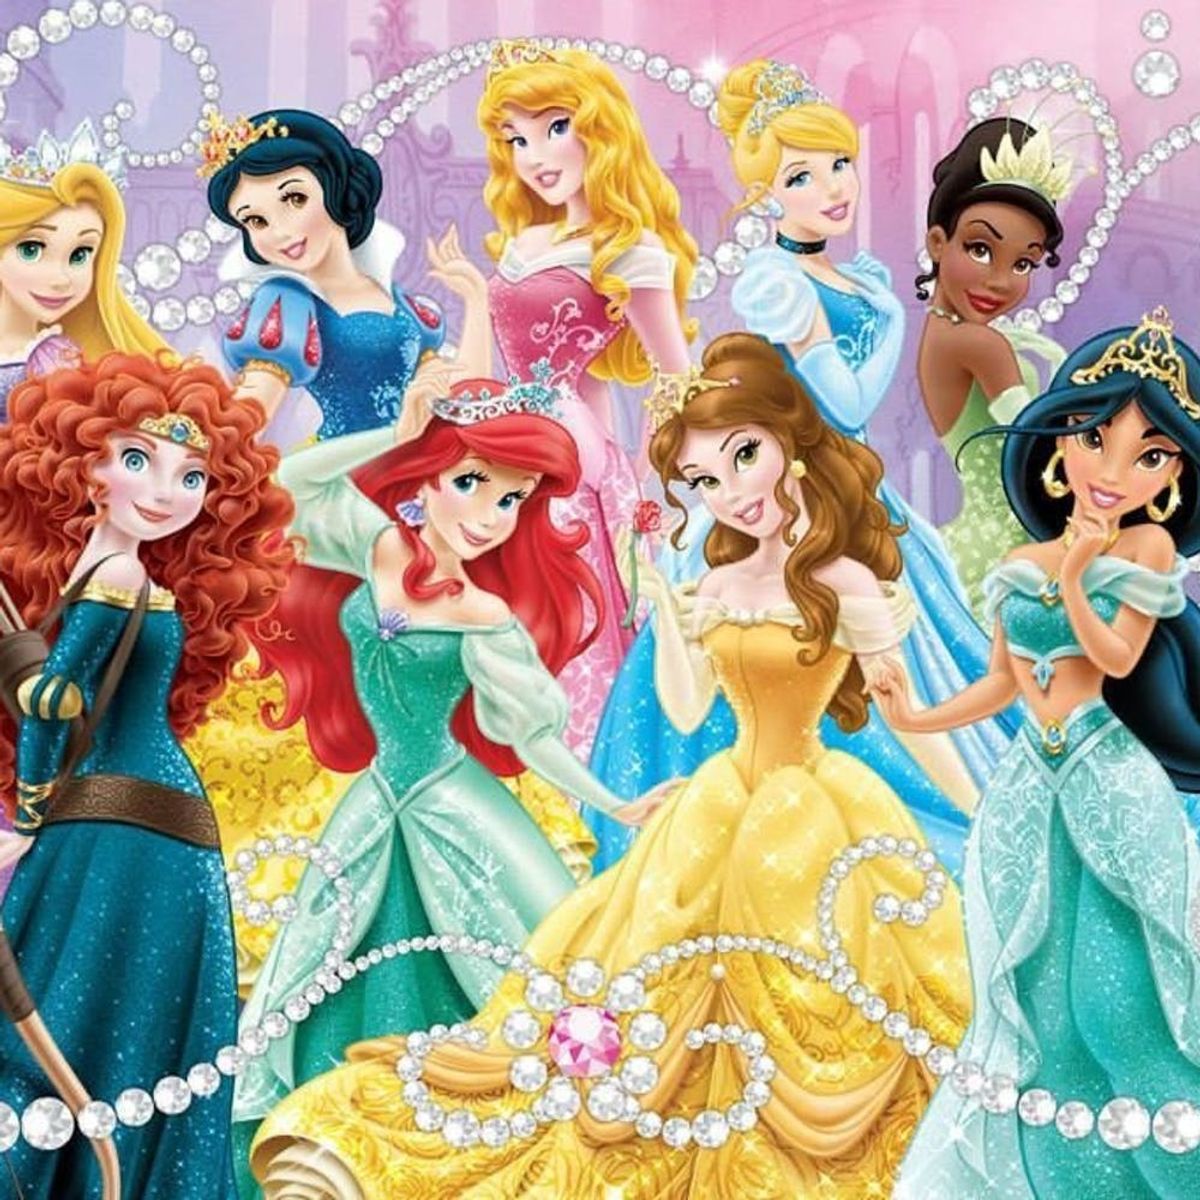 Here Are All the Disney Movies Currently on Netflix